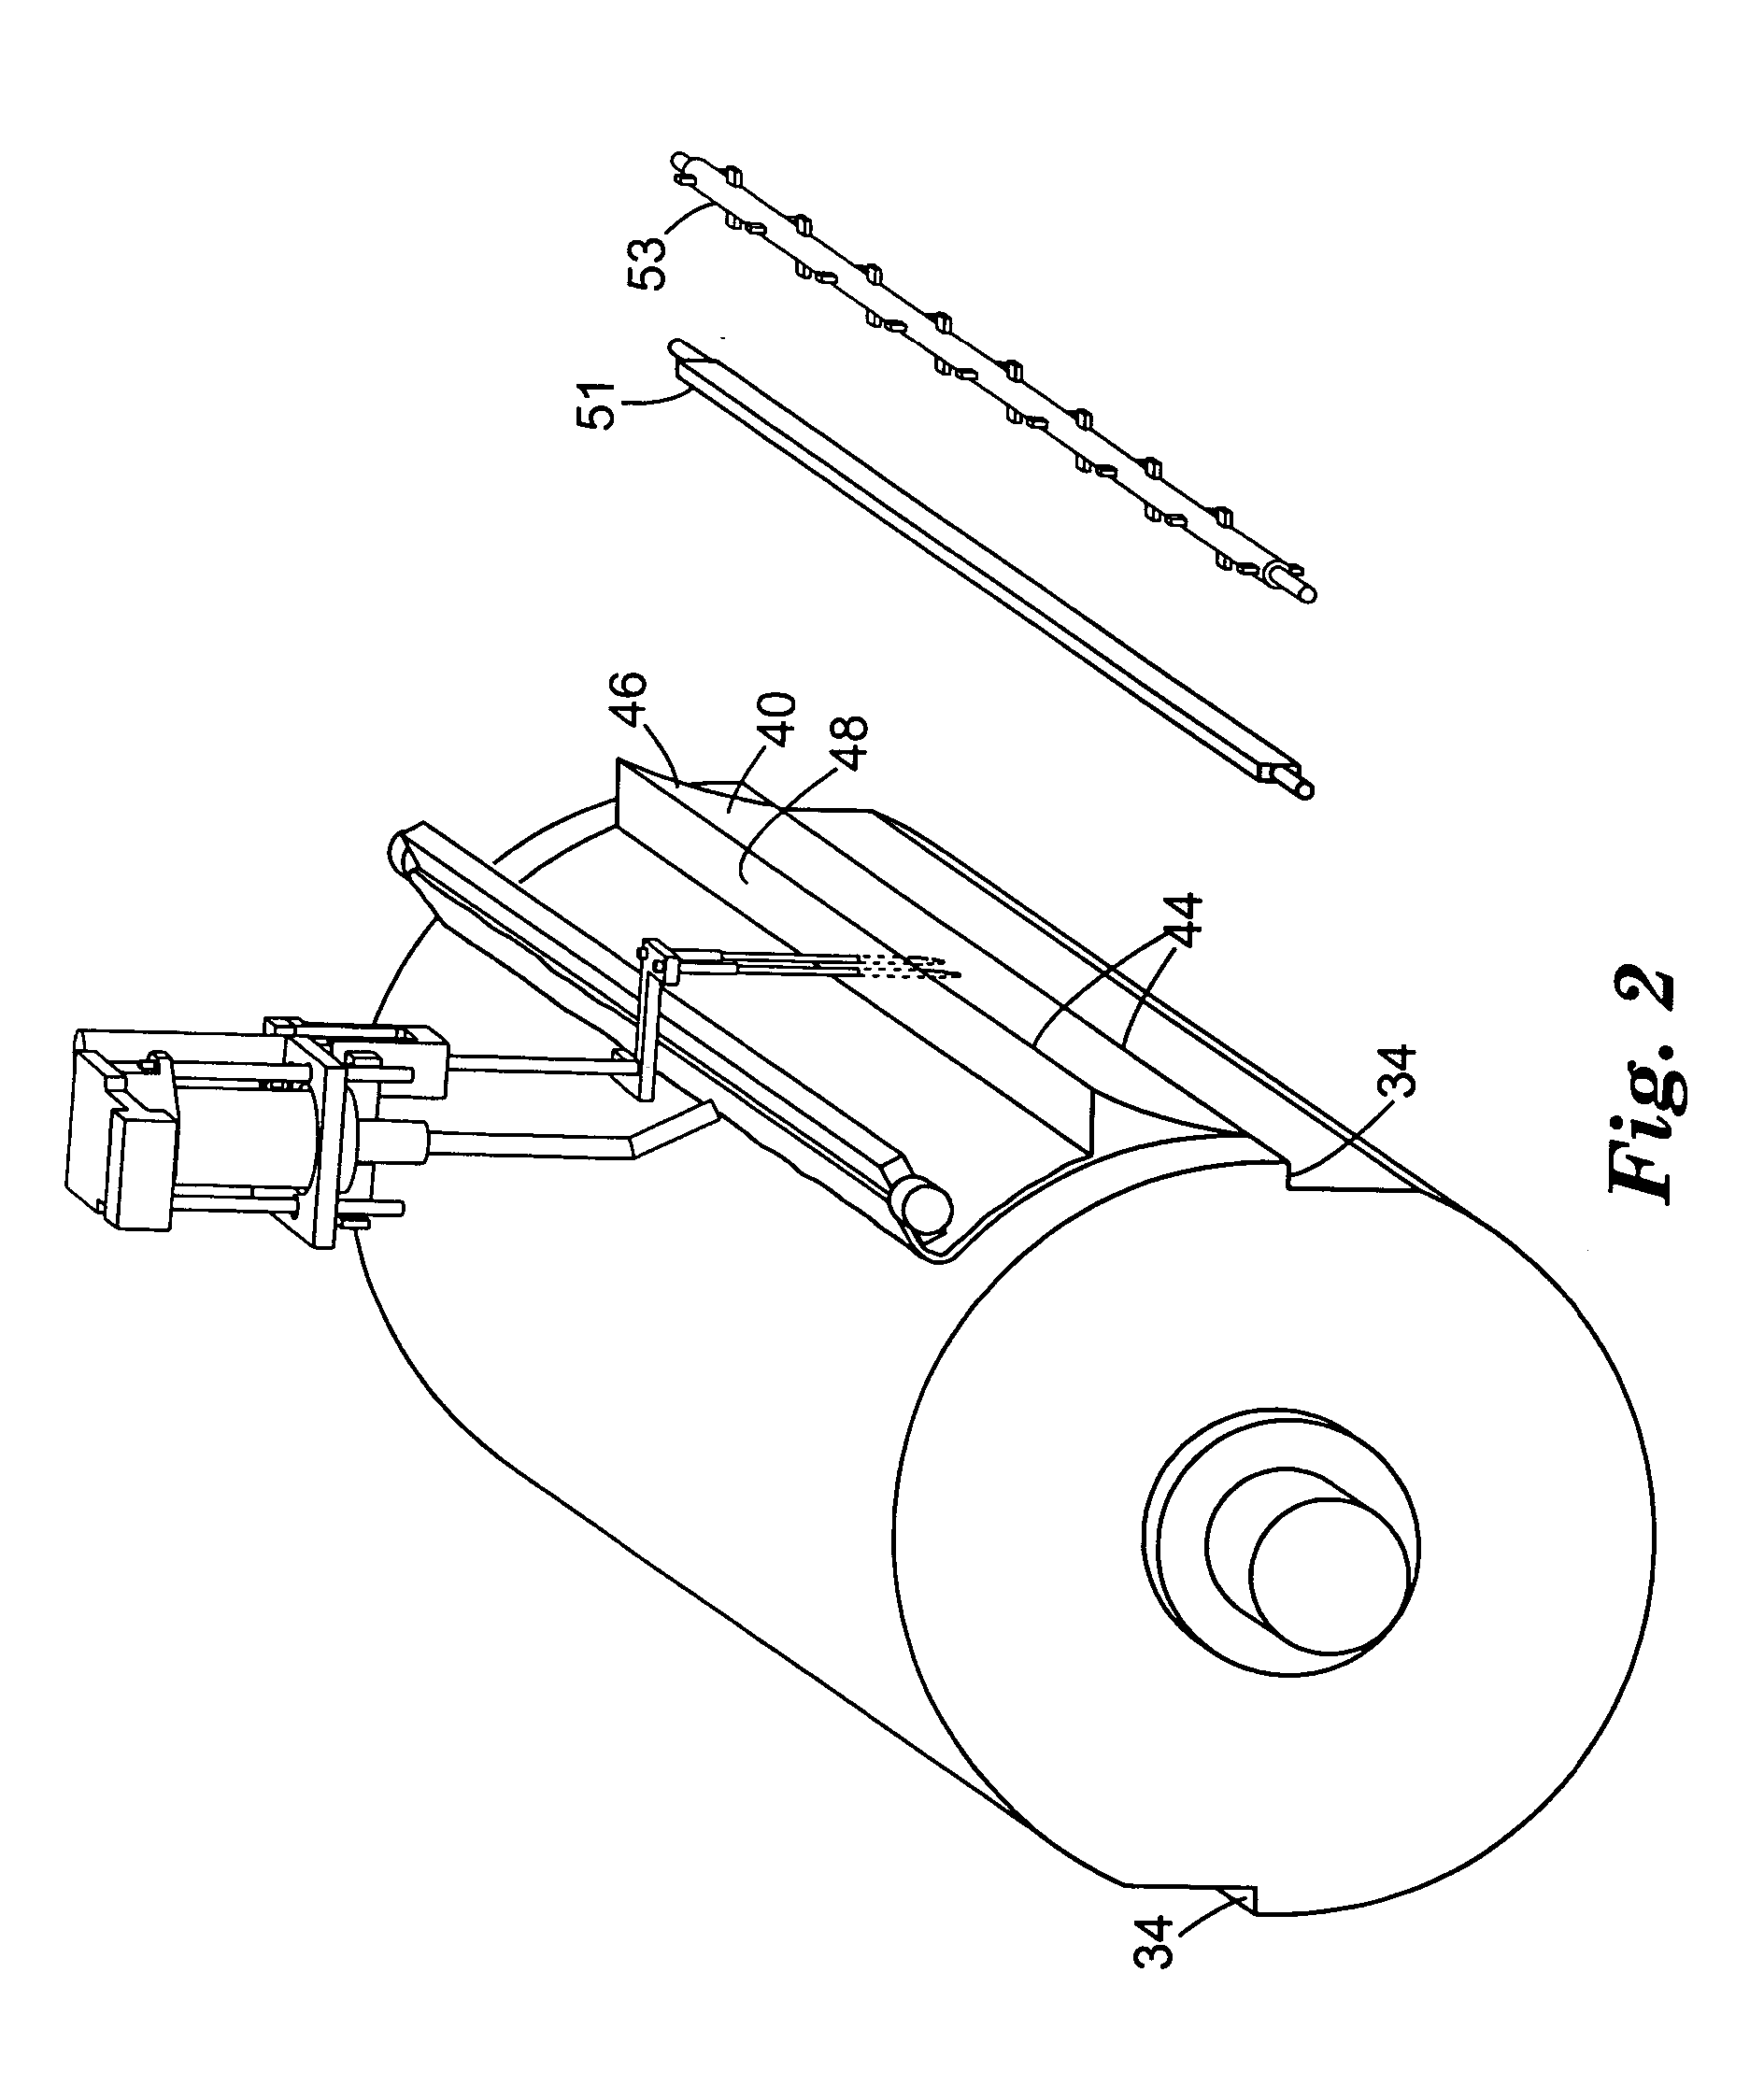 Coating apparatus and methods of applying a polymer coating